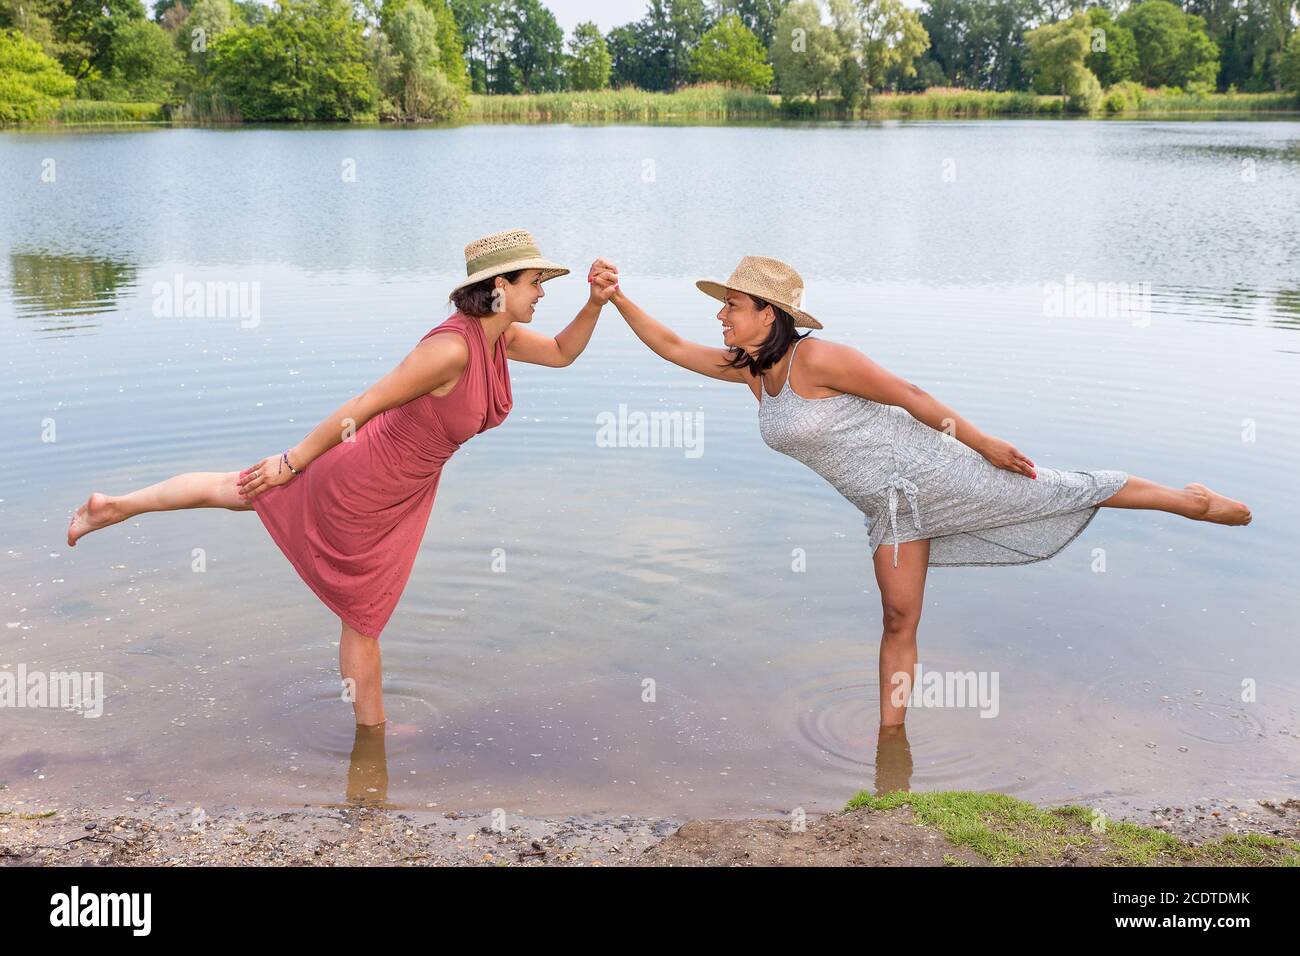 Two women standing together in natural water Stock Photo